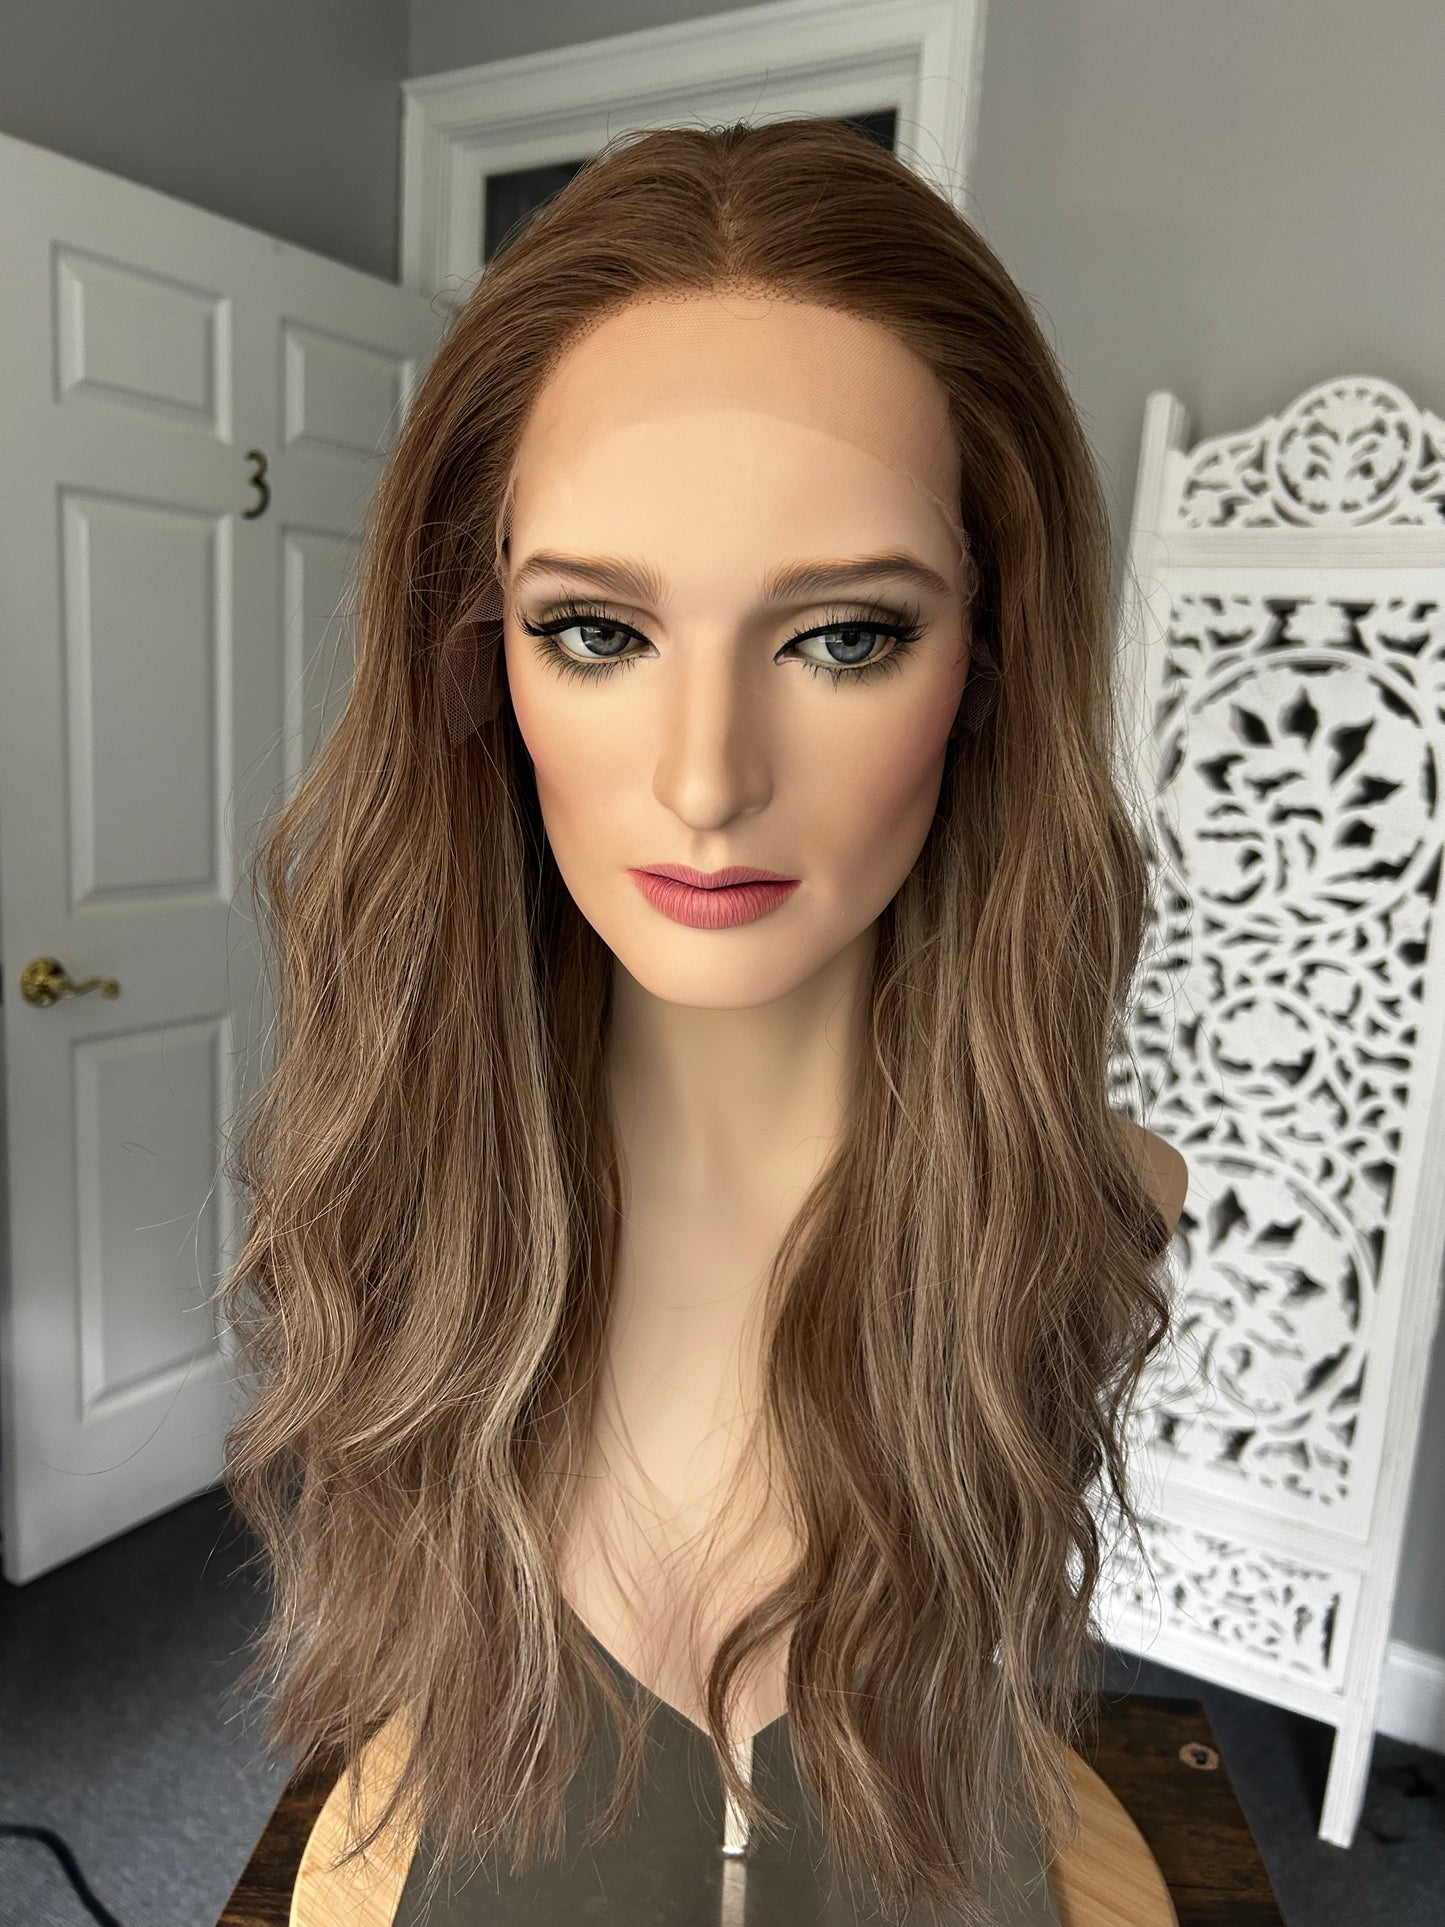 Ashy Level 6 Dark Blonde with Cool Level 7/8 Blonde Highlights Human Hair Wig